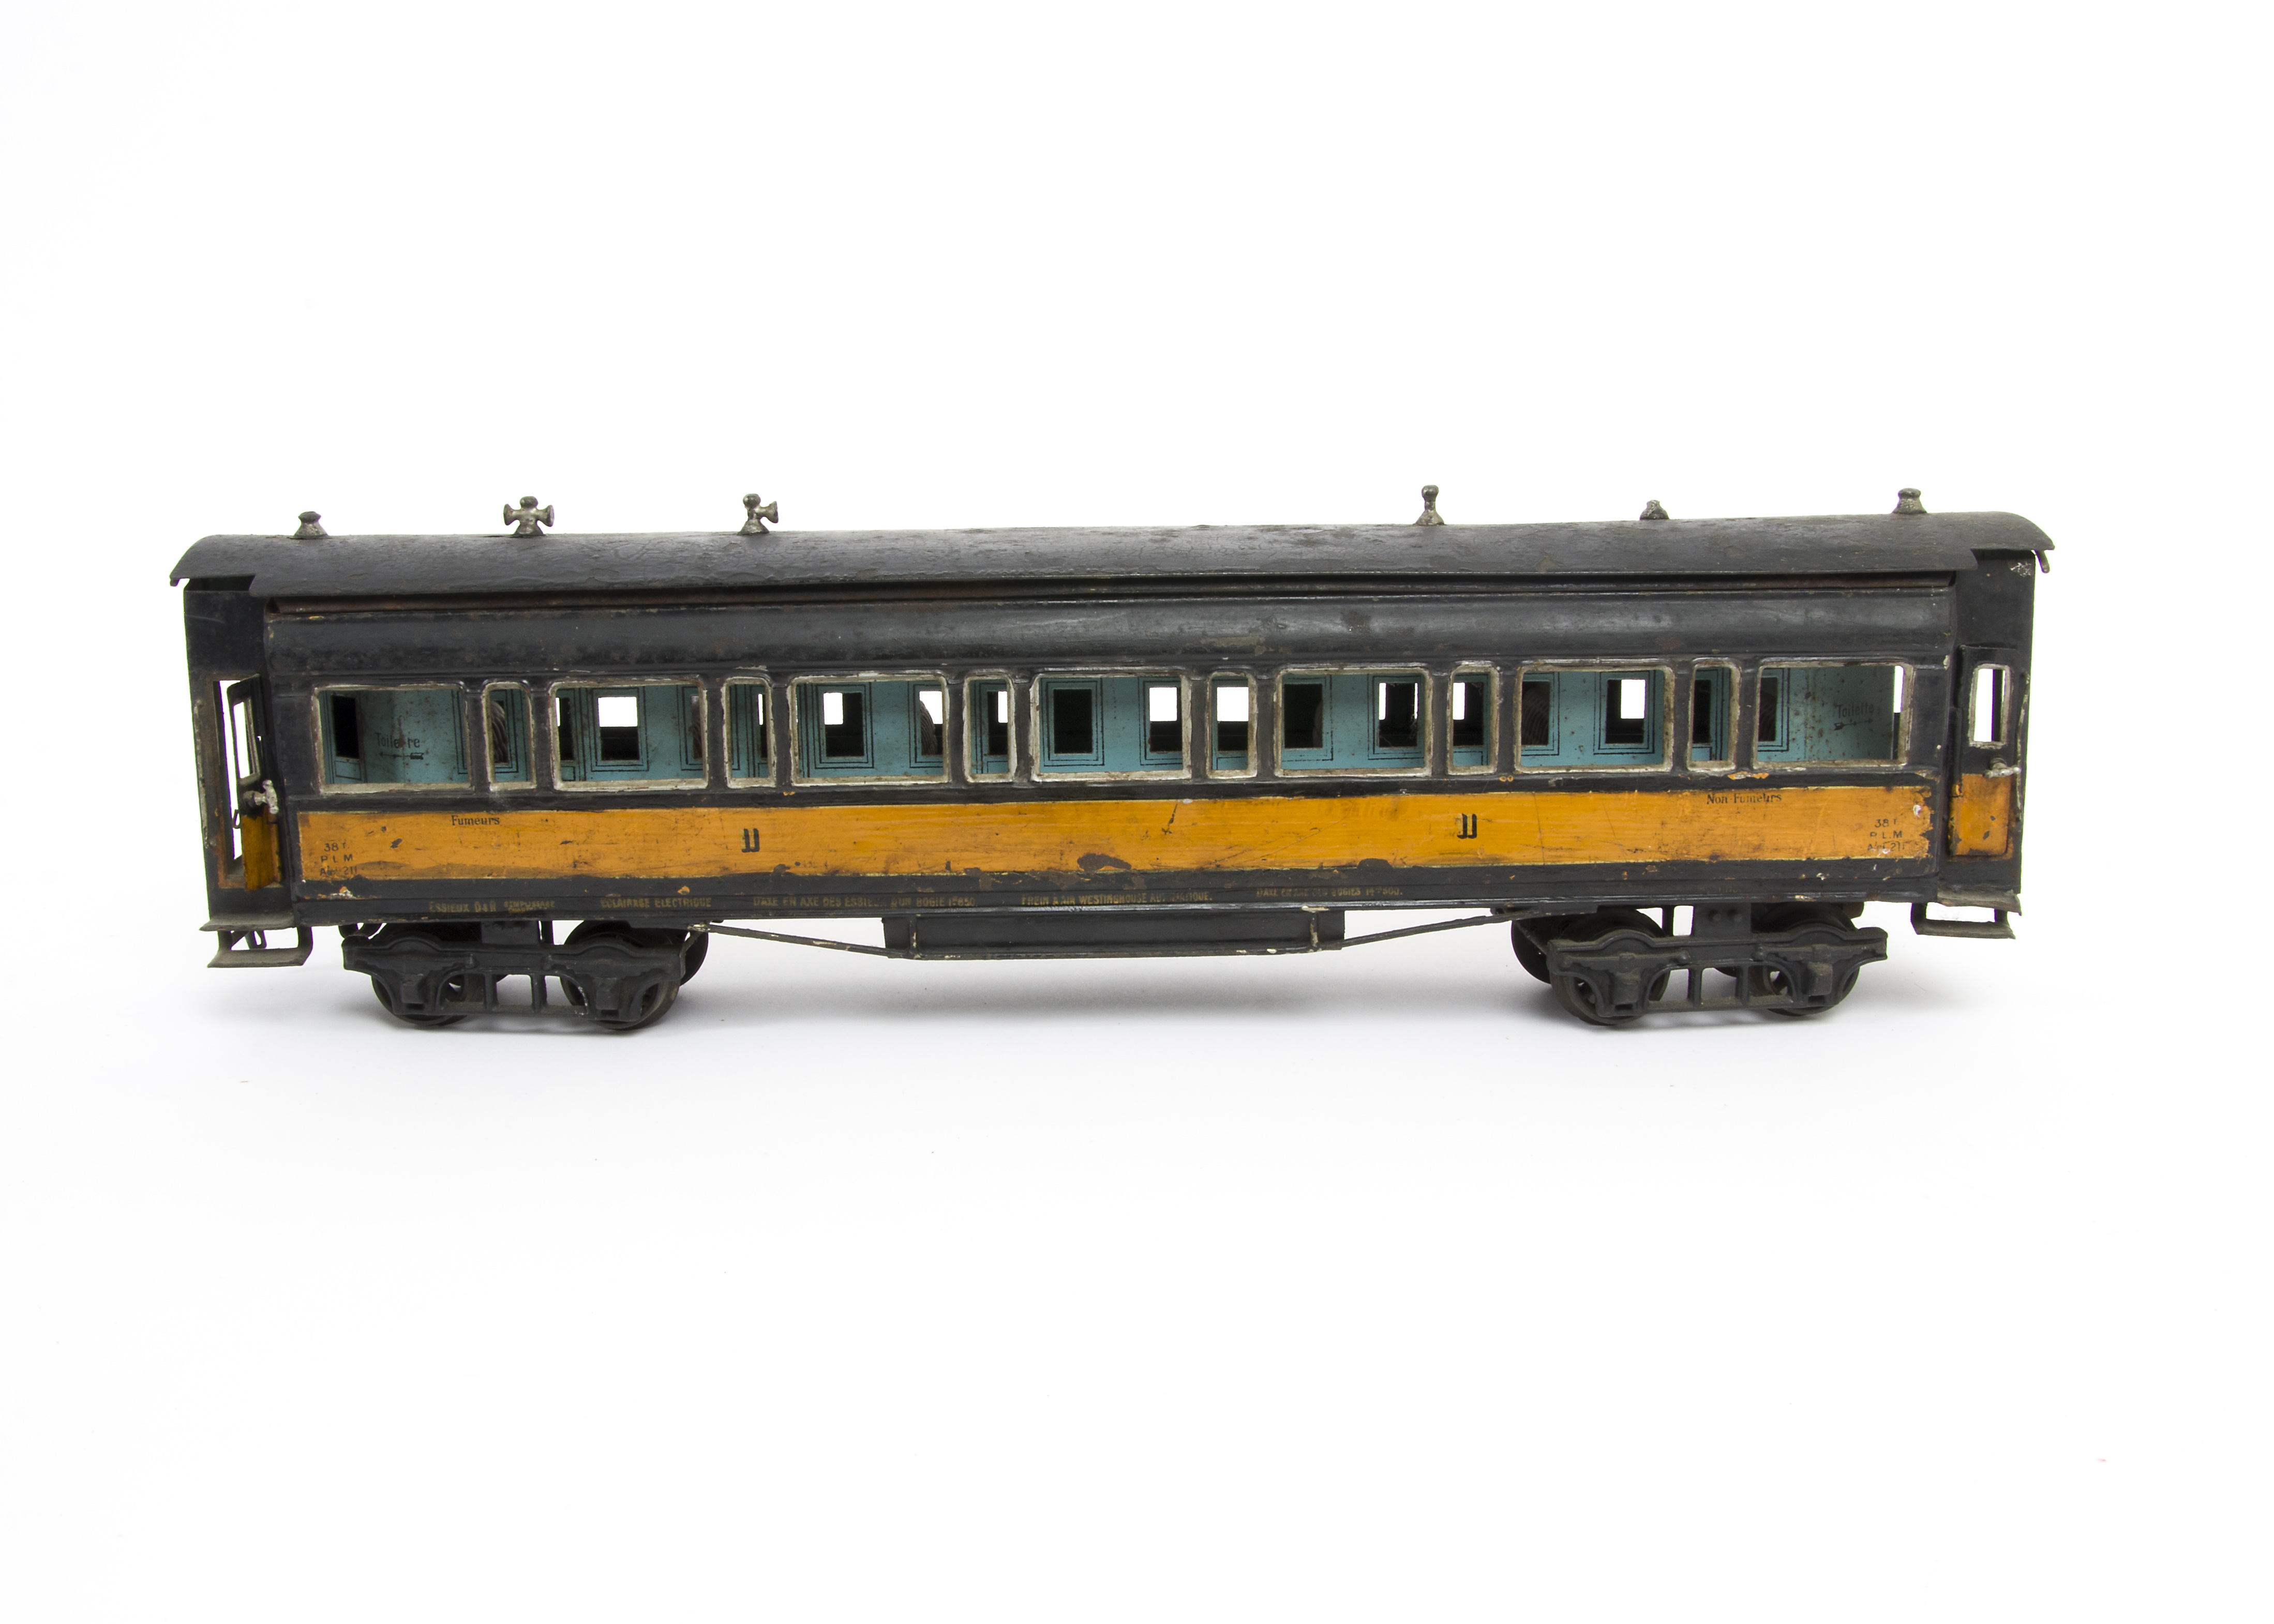 A Märklin Gauge 1 French-Market 2nd-Class 50cm-long Coach, finished in PLM black livery with